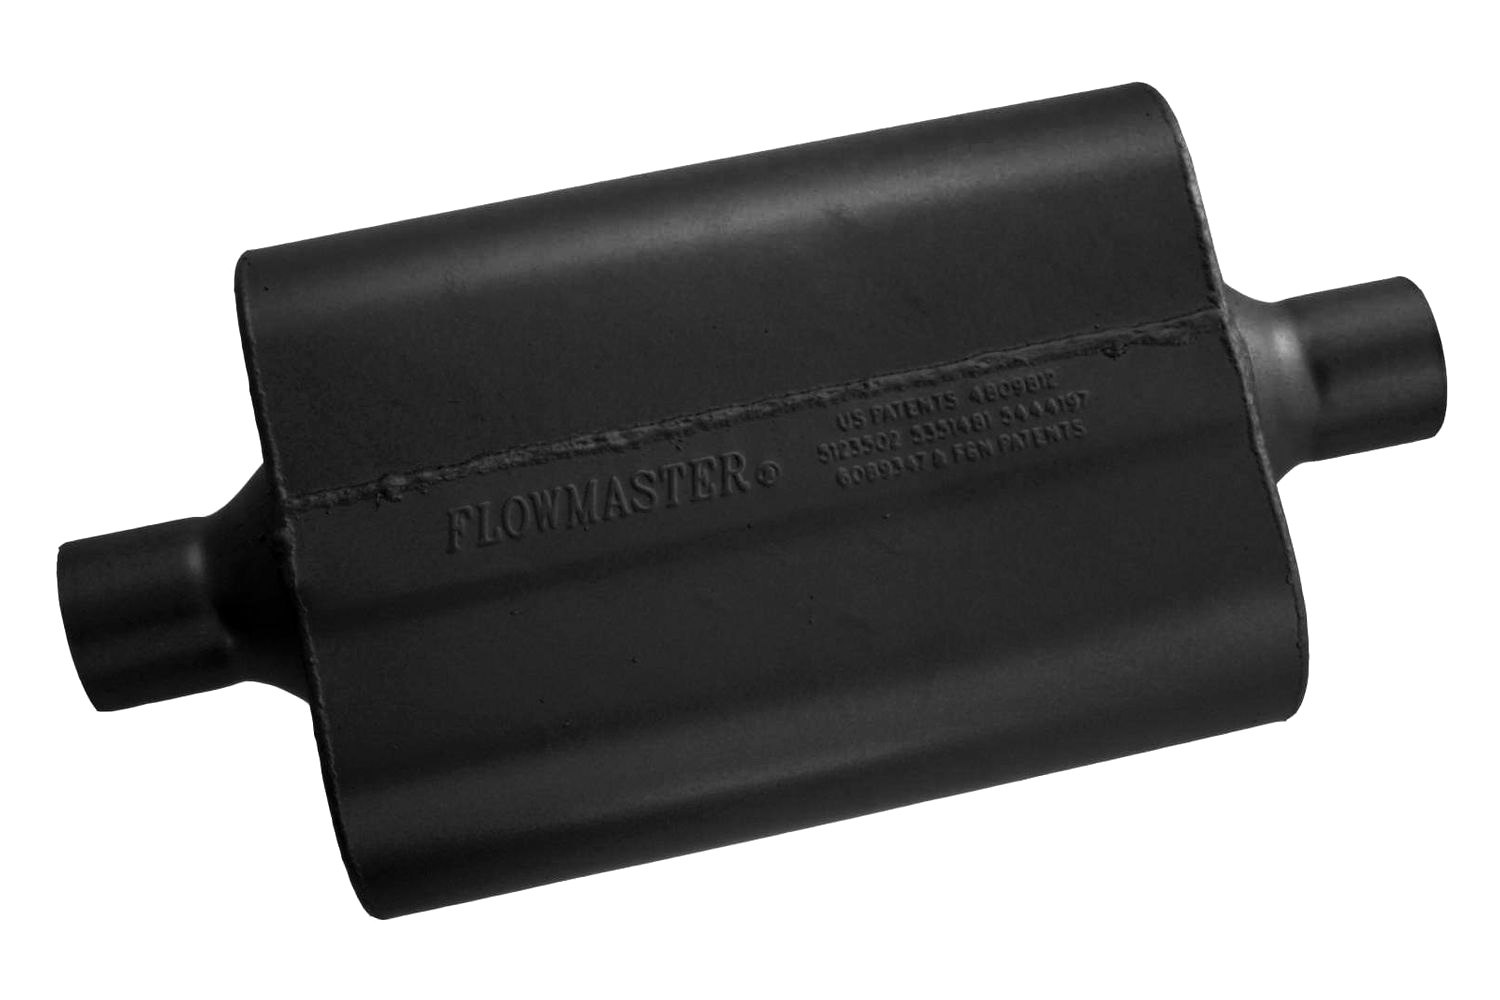 Flowmaster exhaust sounds